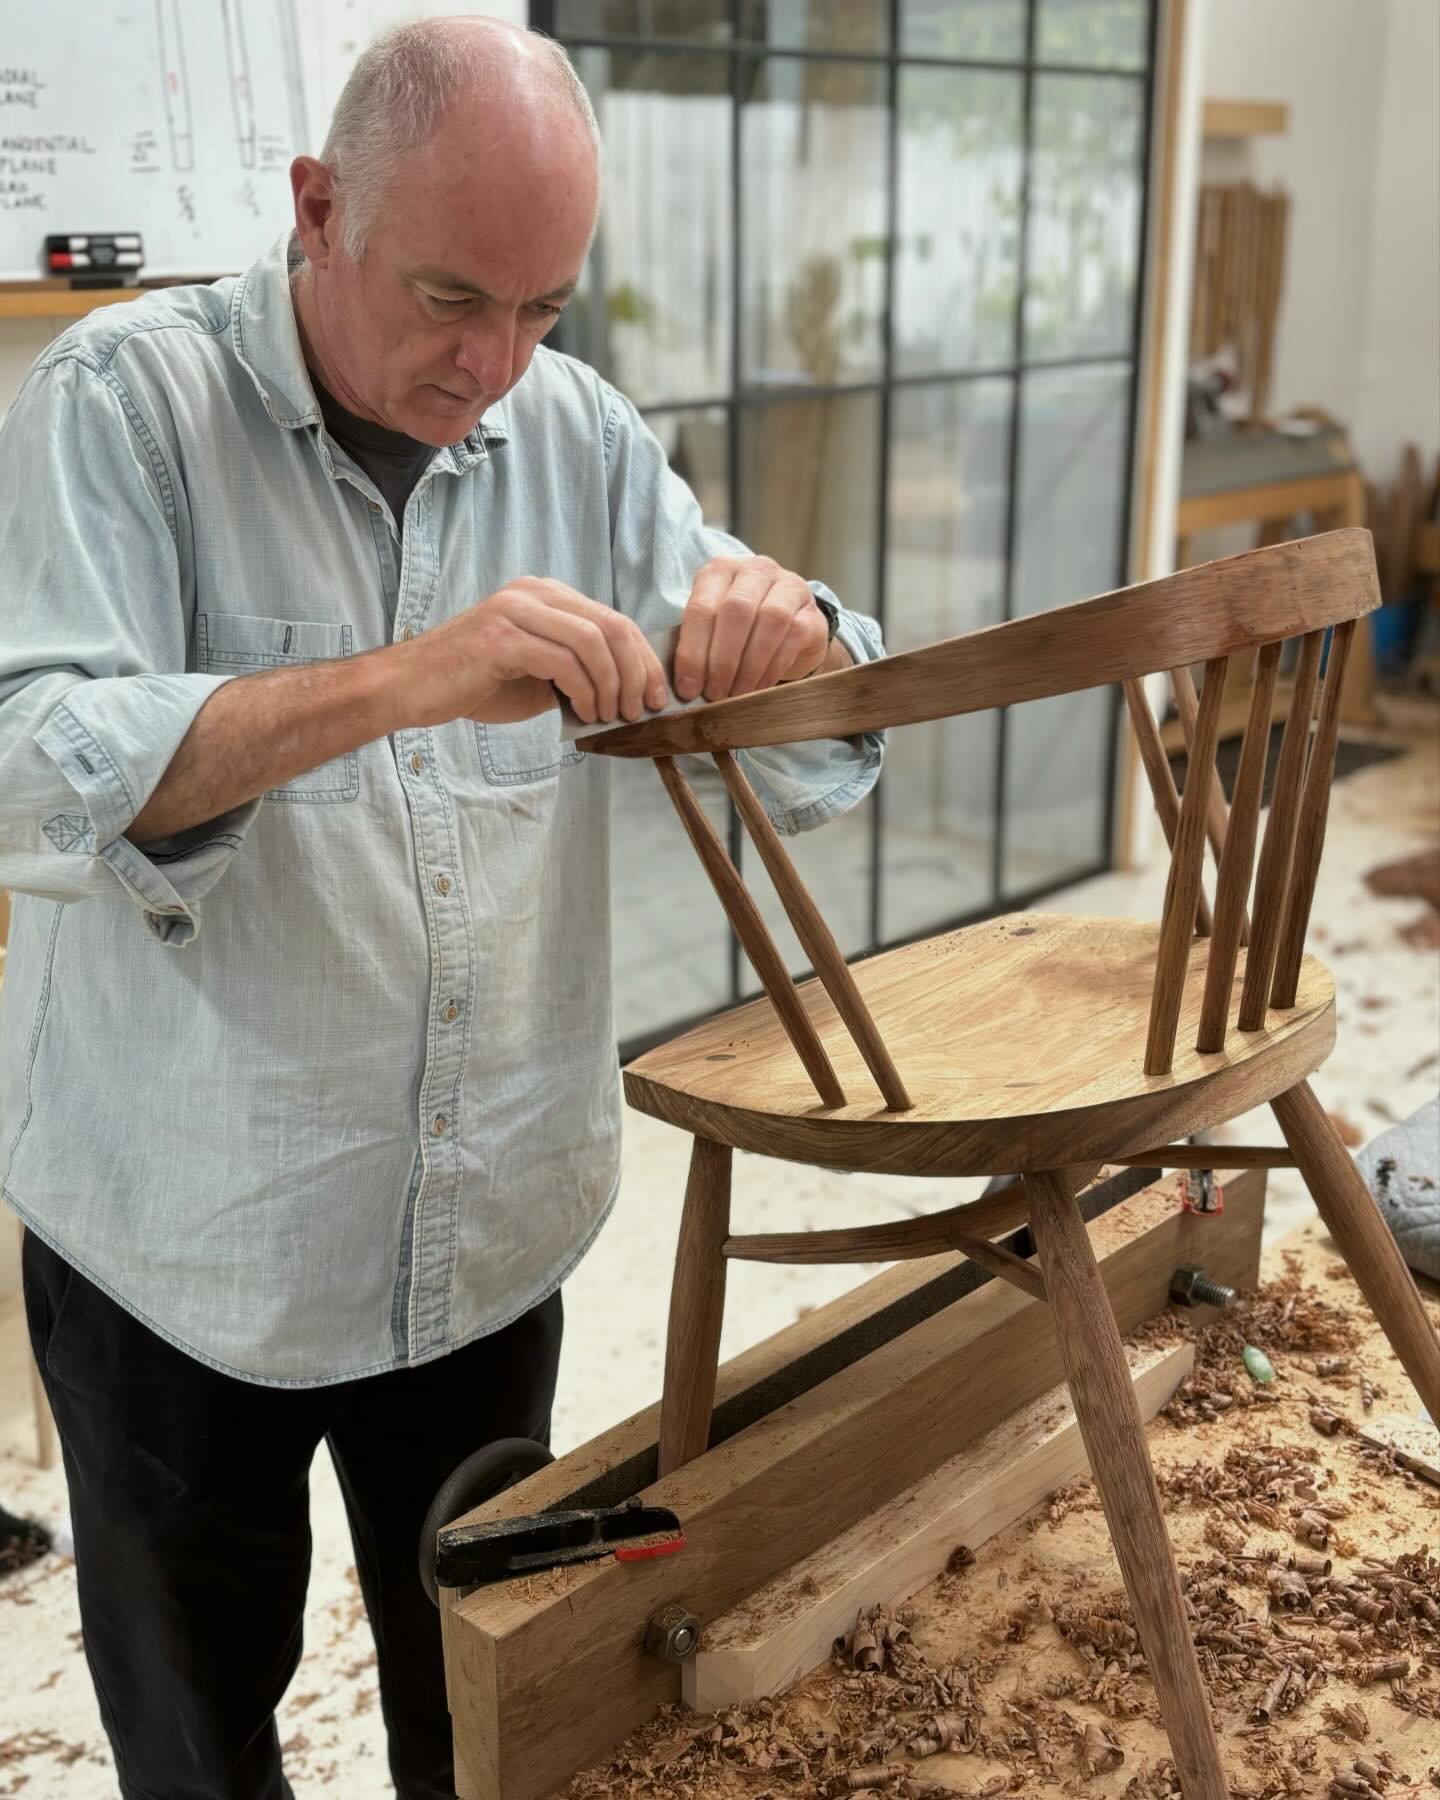 David&rsquo;s finishing touches 🙌
.
.
#chairmaking #chairmakingcourses #woodworkingclasses #chairmaker